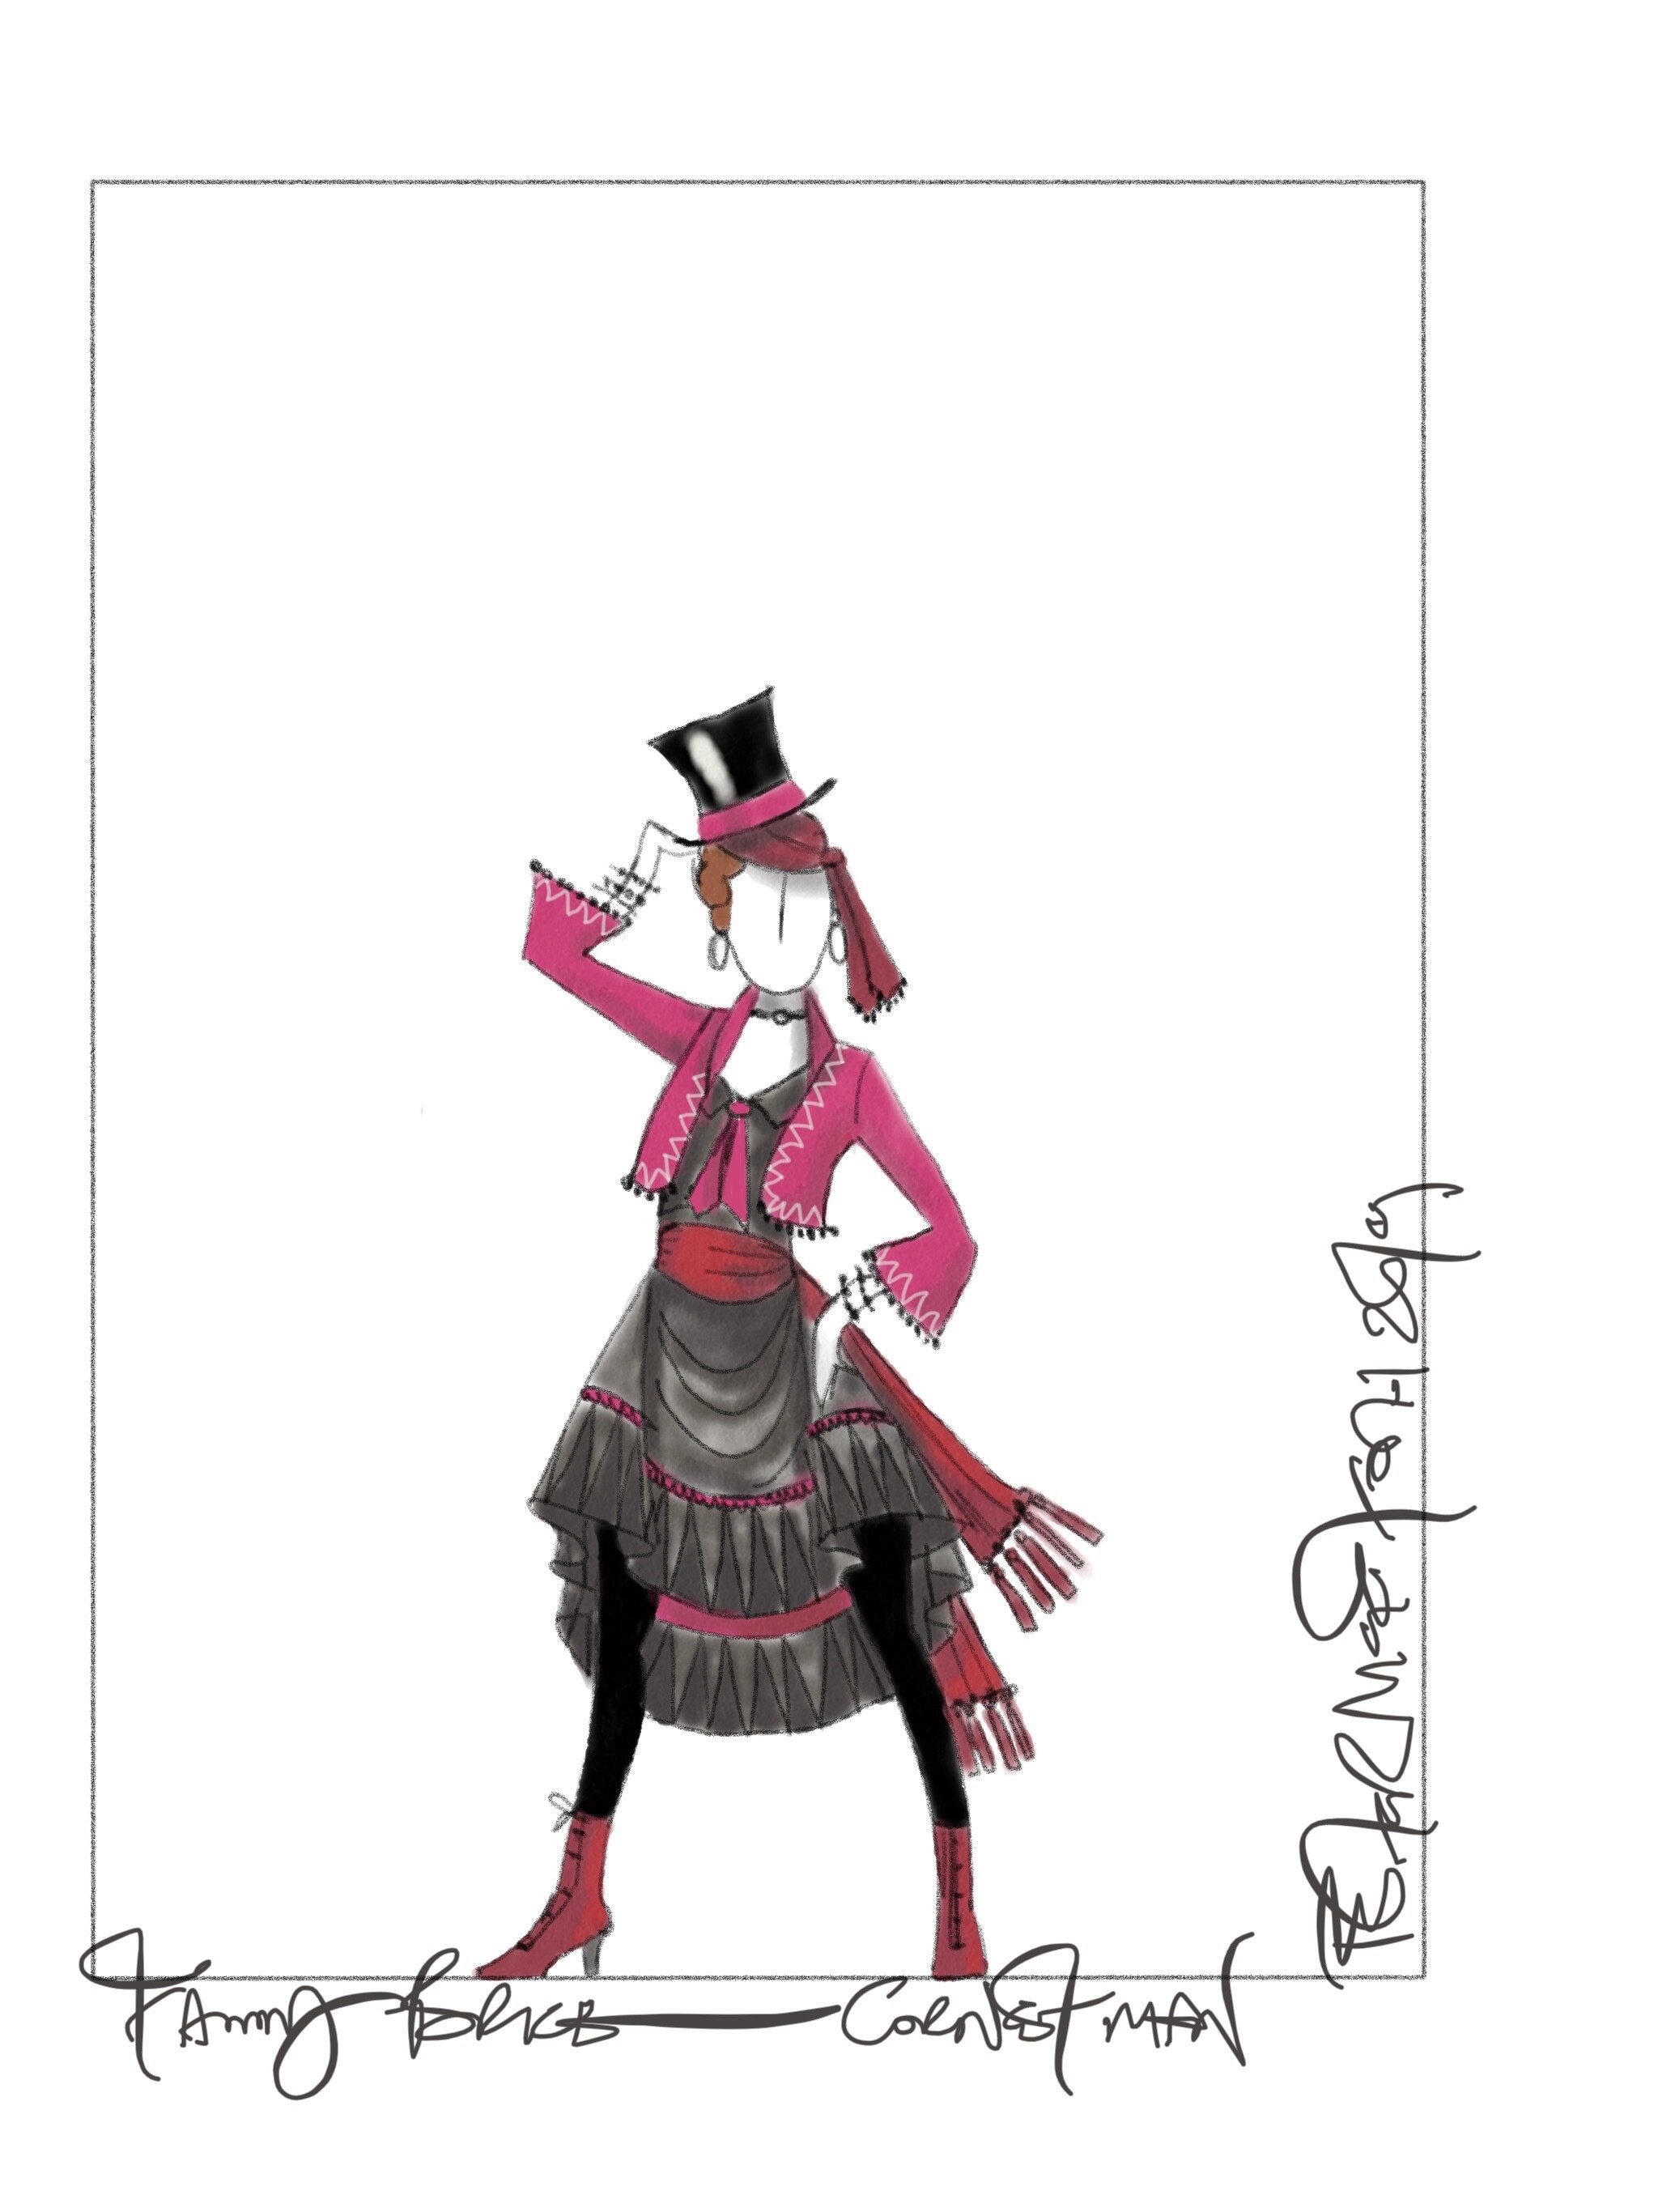 Funny Girl - costume drawing 2 (Concepts sketch).JPG